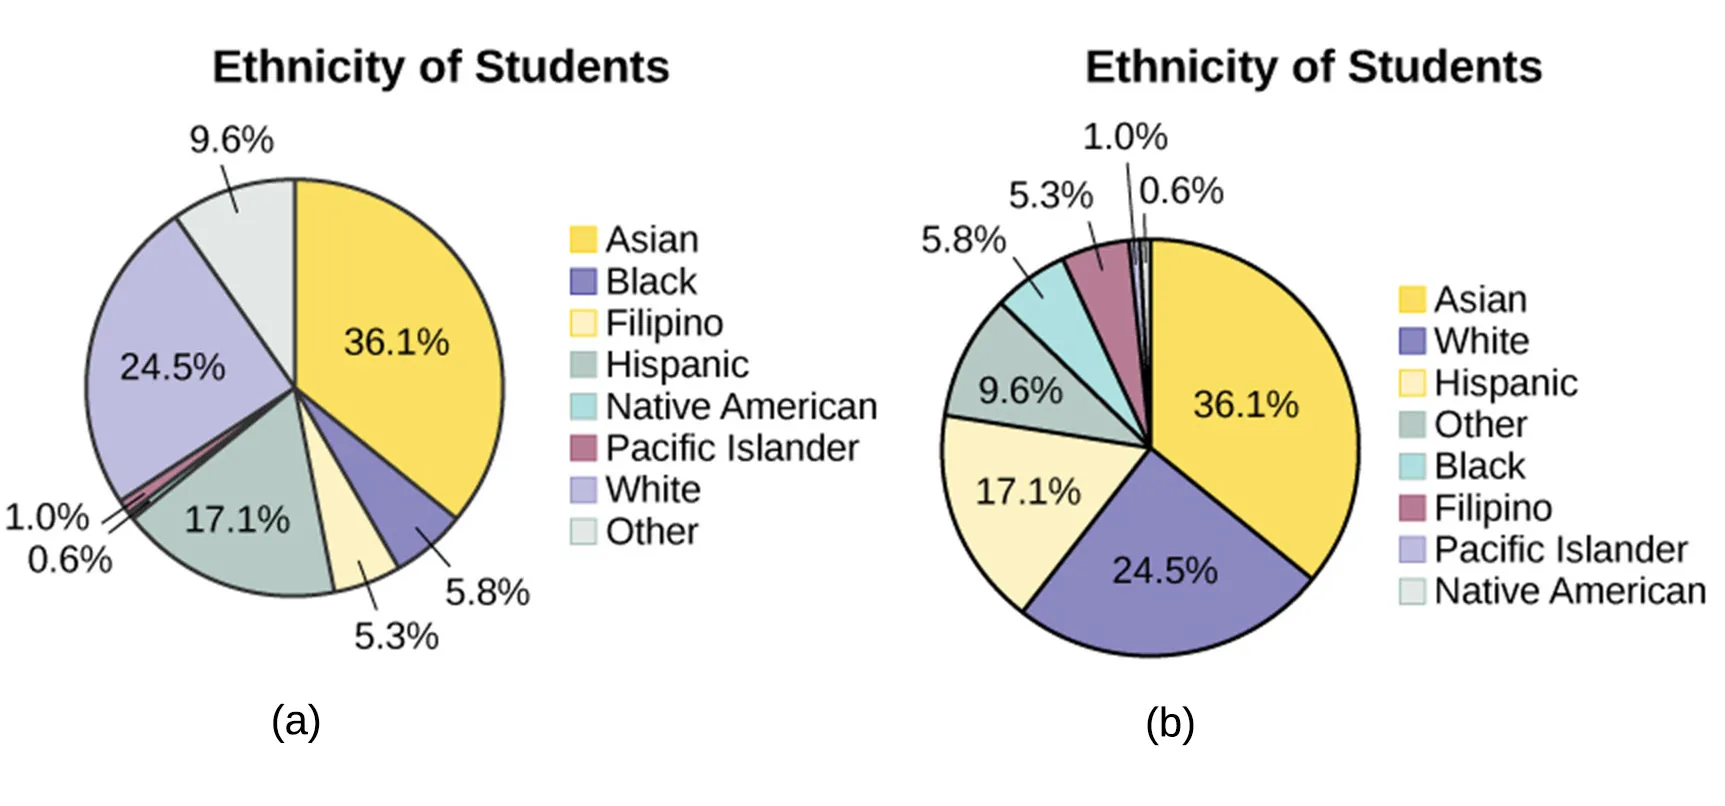 Two pie charts labeled: Ethnicity of Students. The top one is divided: 36.1% Asian, 5.8% Black, 5.3% Filipino, 17.1% Hispanic, 0.6% Native American, 1.0% Pacific Islander, 24.5% White, and 9.6% Other. The bottom one is divided: 36.1% Asian, 24.5% White, 17.1% Hispanic, 9.6% Other, 5.8% Black, 5.3% Filipino, 1.0% Pacific Islander, 0.6% Native American.